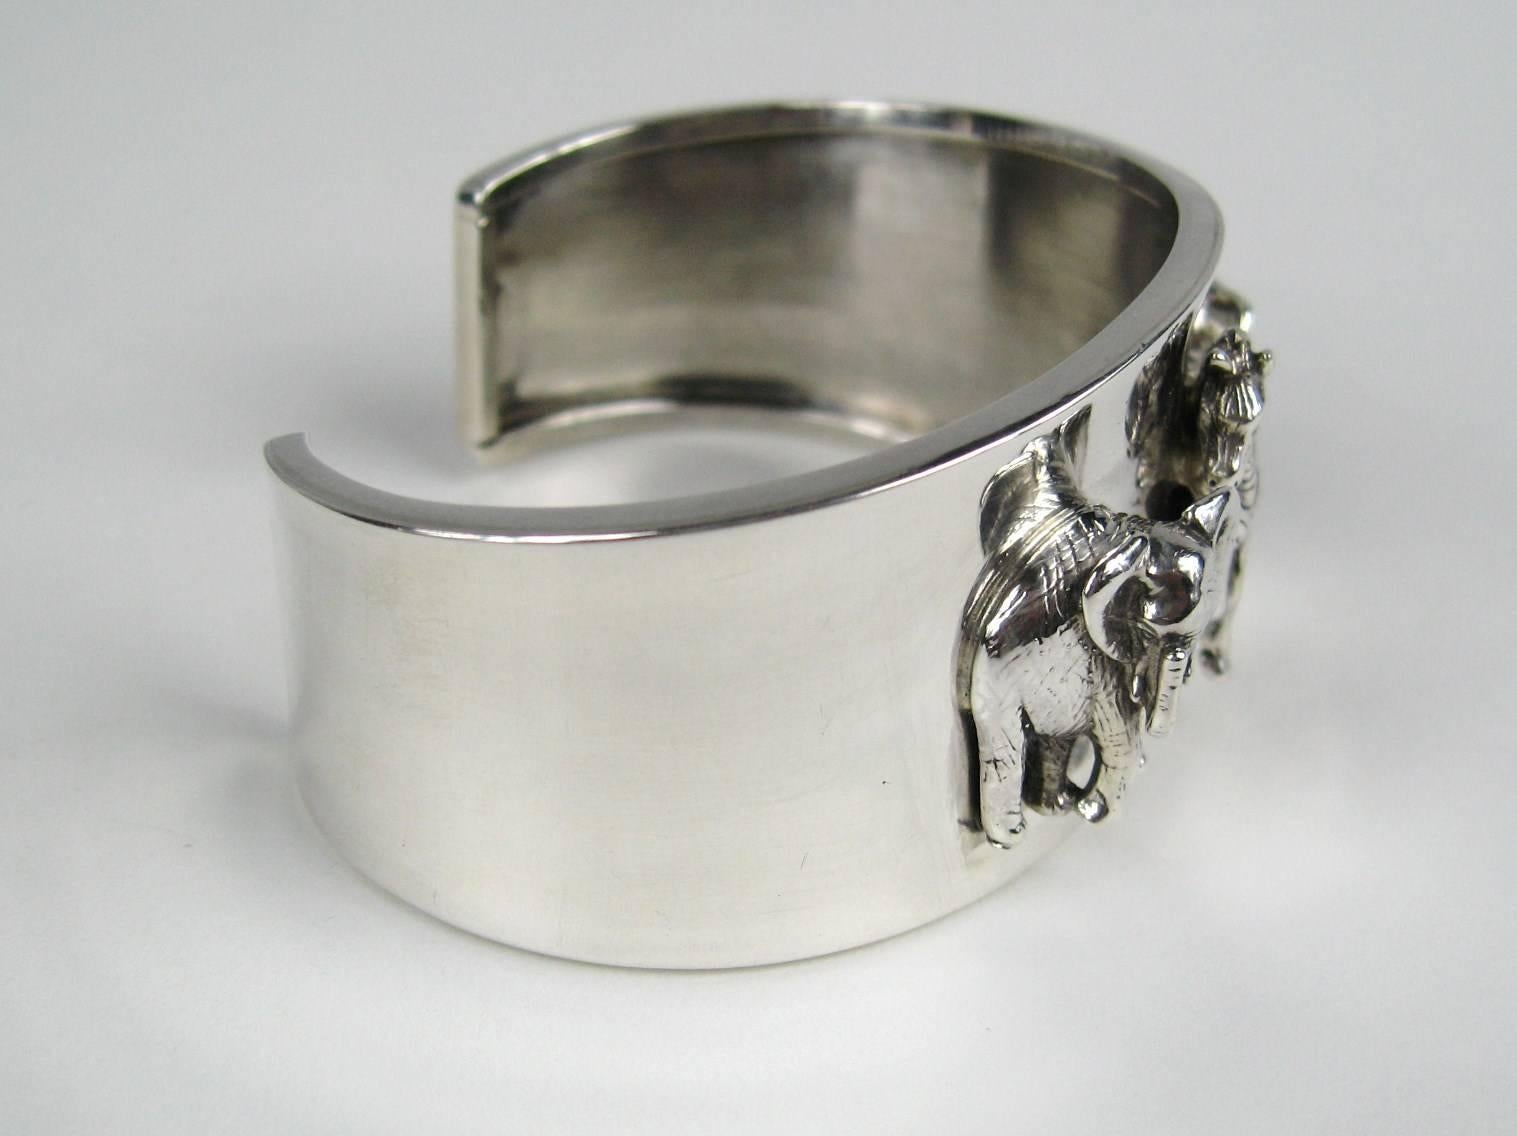 Carol Felley Sterling Cuff Bracelet featuring three 3-D Animals. An elephant on either side of the Zebra in the center. Hallmarked and dated inside cuff. It is an Amazing Stunning piece of Art. Art By Renowned New Mexico Artist Carol Felley.